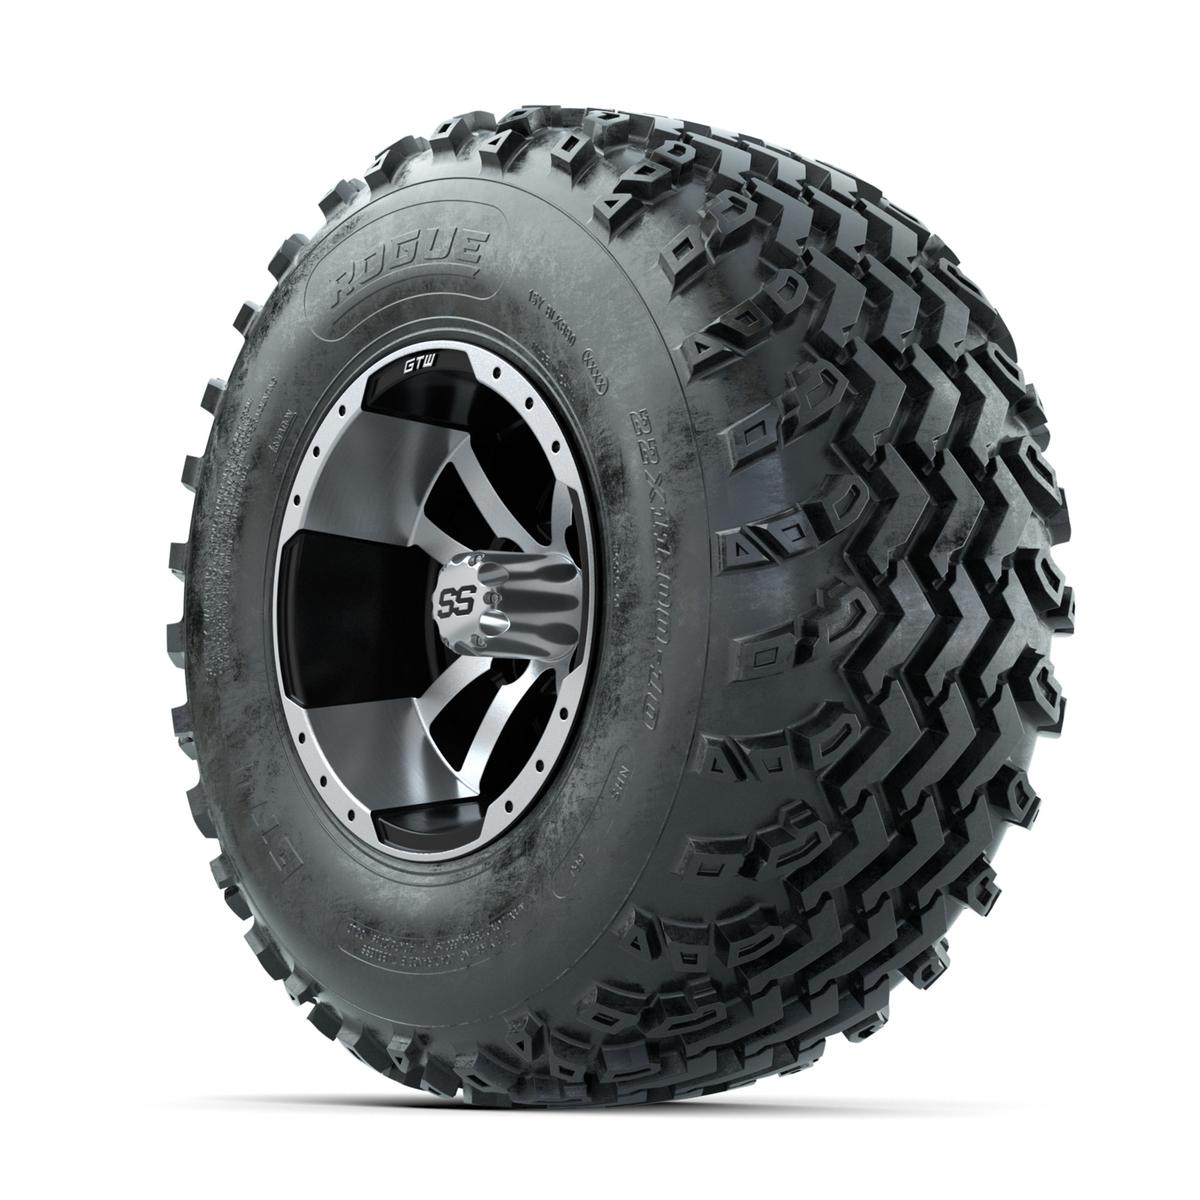 GTW Storm Trooper Machined/Black 10 in Wheels with 22x11.00-10 Rogue All Terrain Tires – Full Set